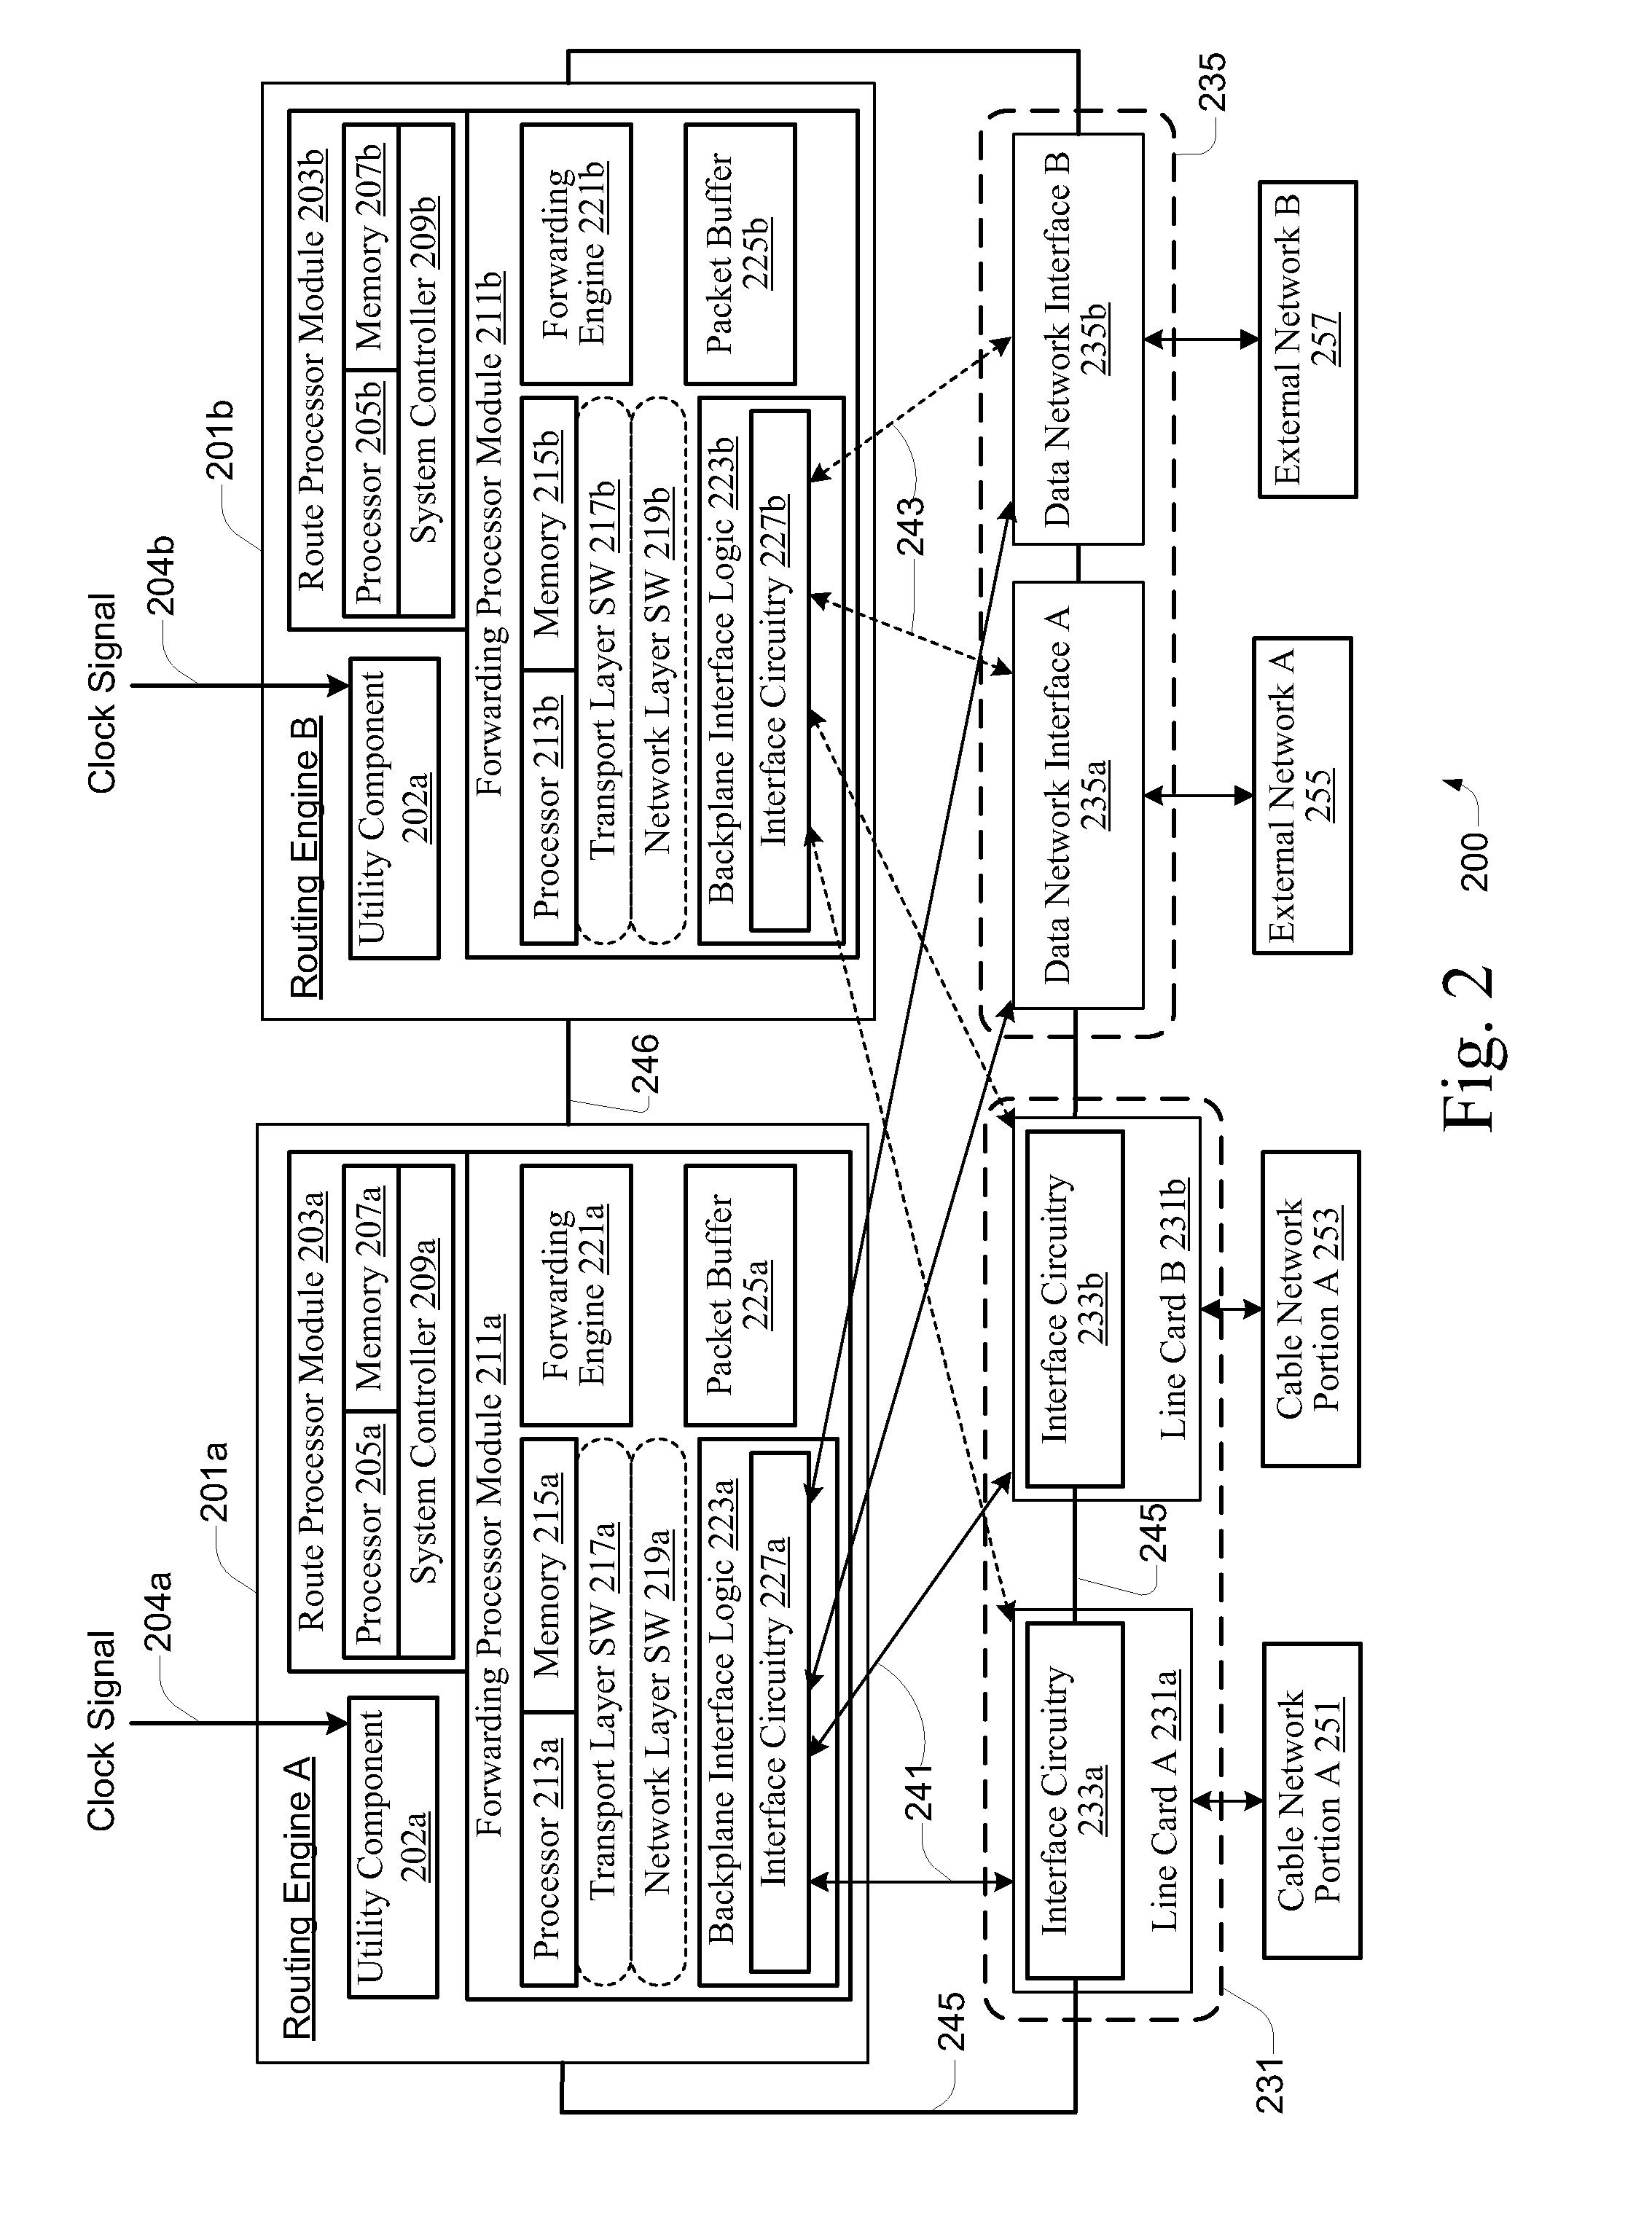 Traffic Flow Scheduling Techniques Implemented on Bonded Channels of a Shared Access Cable Network